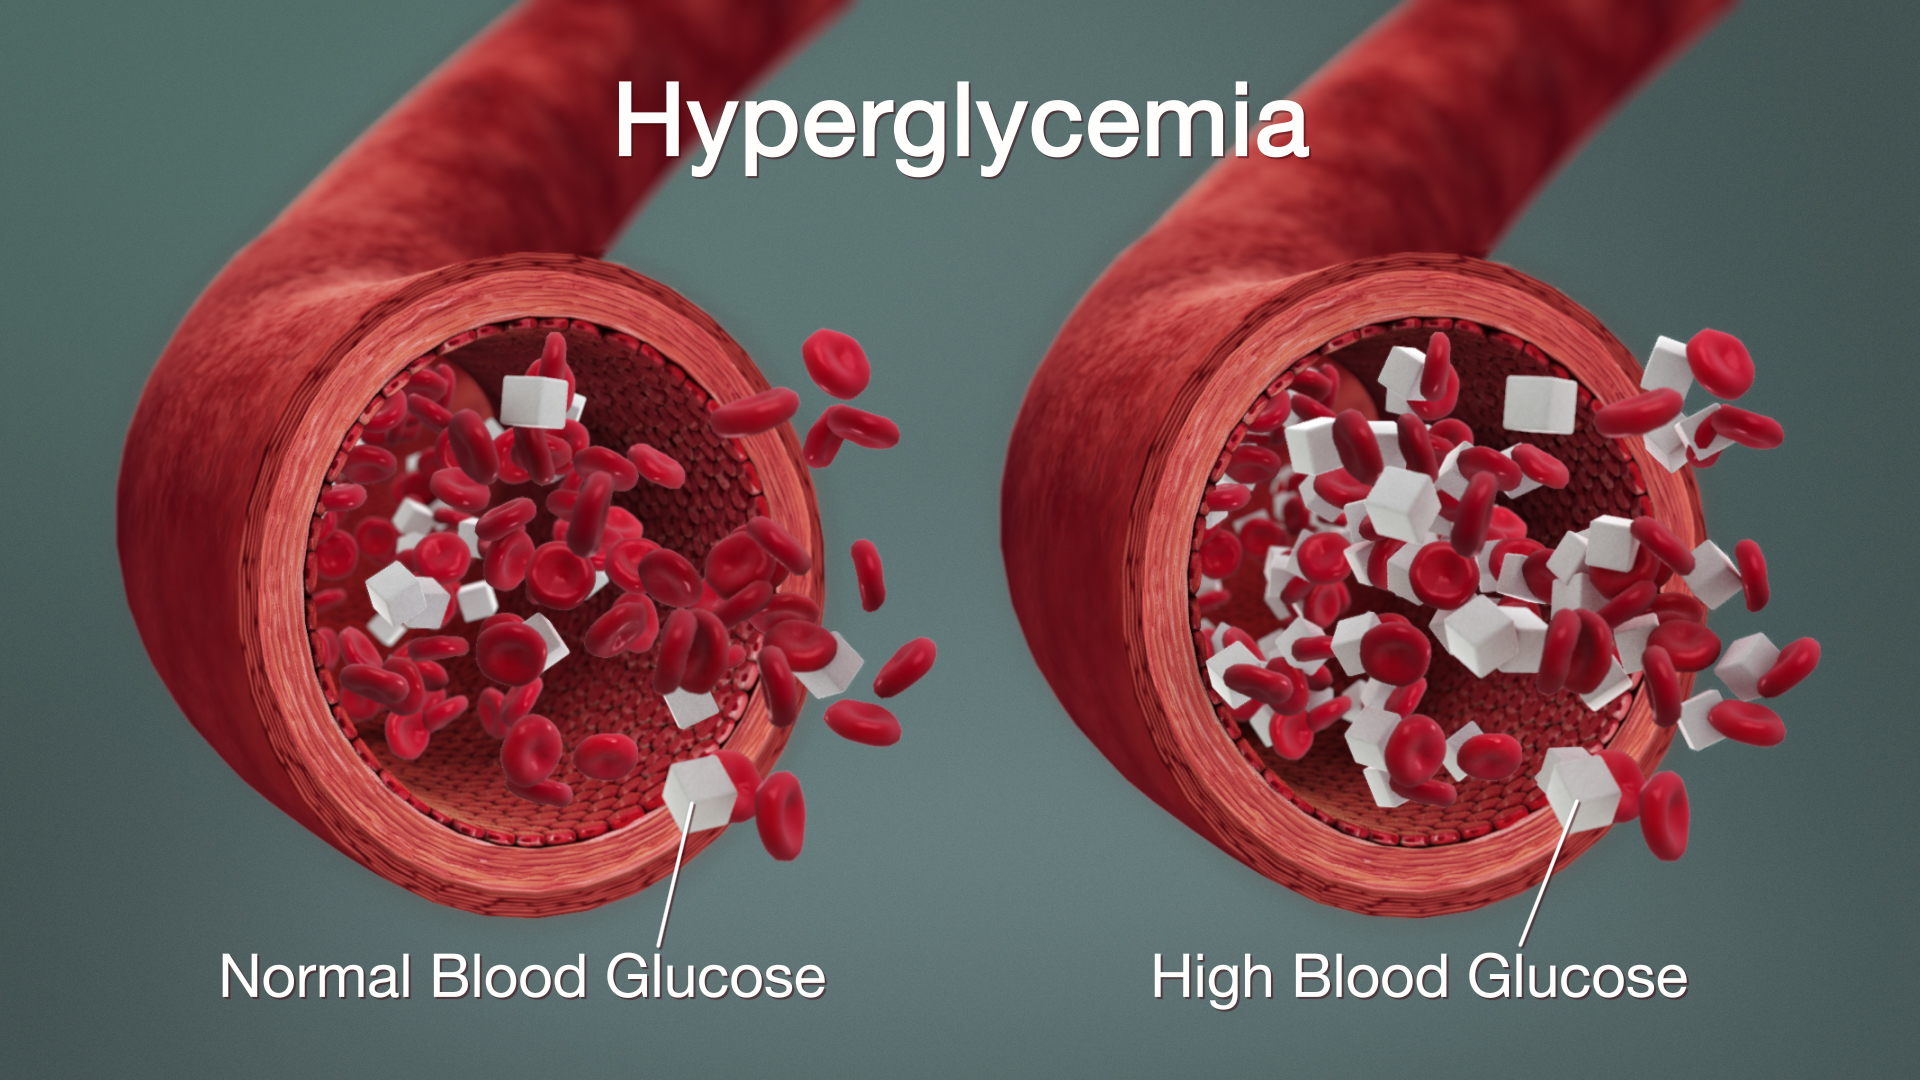 3D medical animation still showing difference between Normal and High Blood Glucose